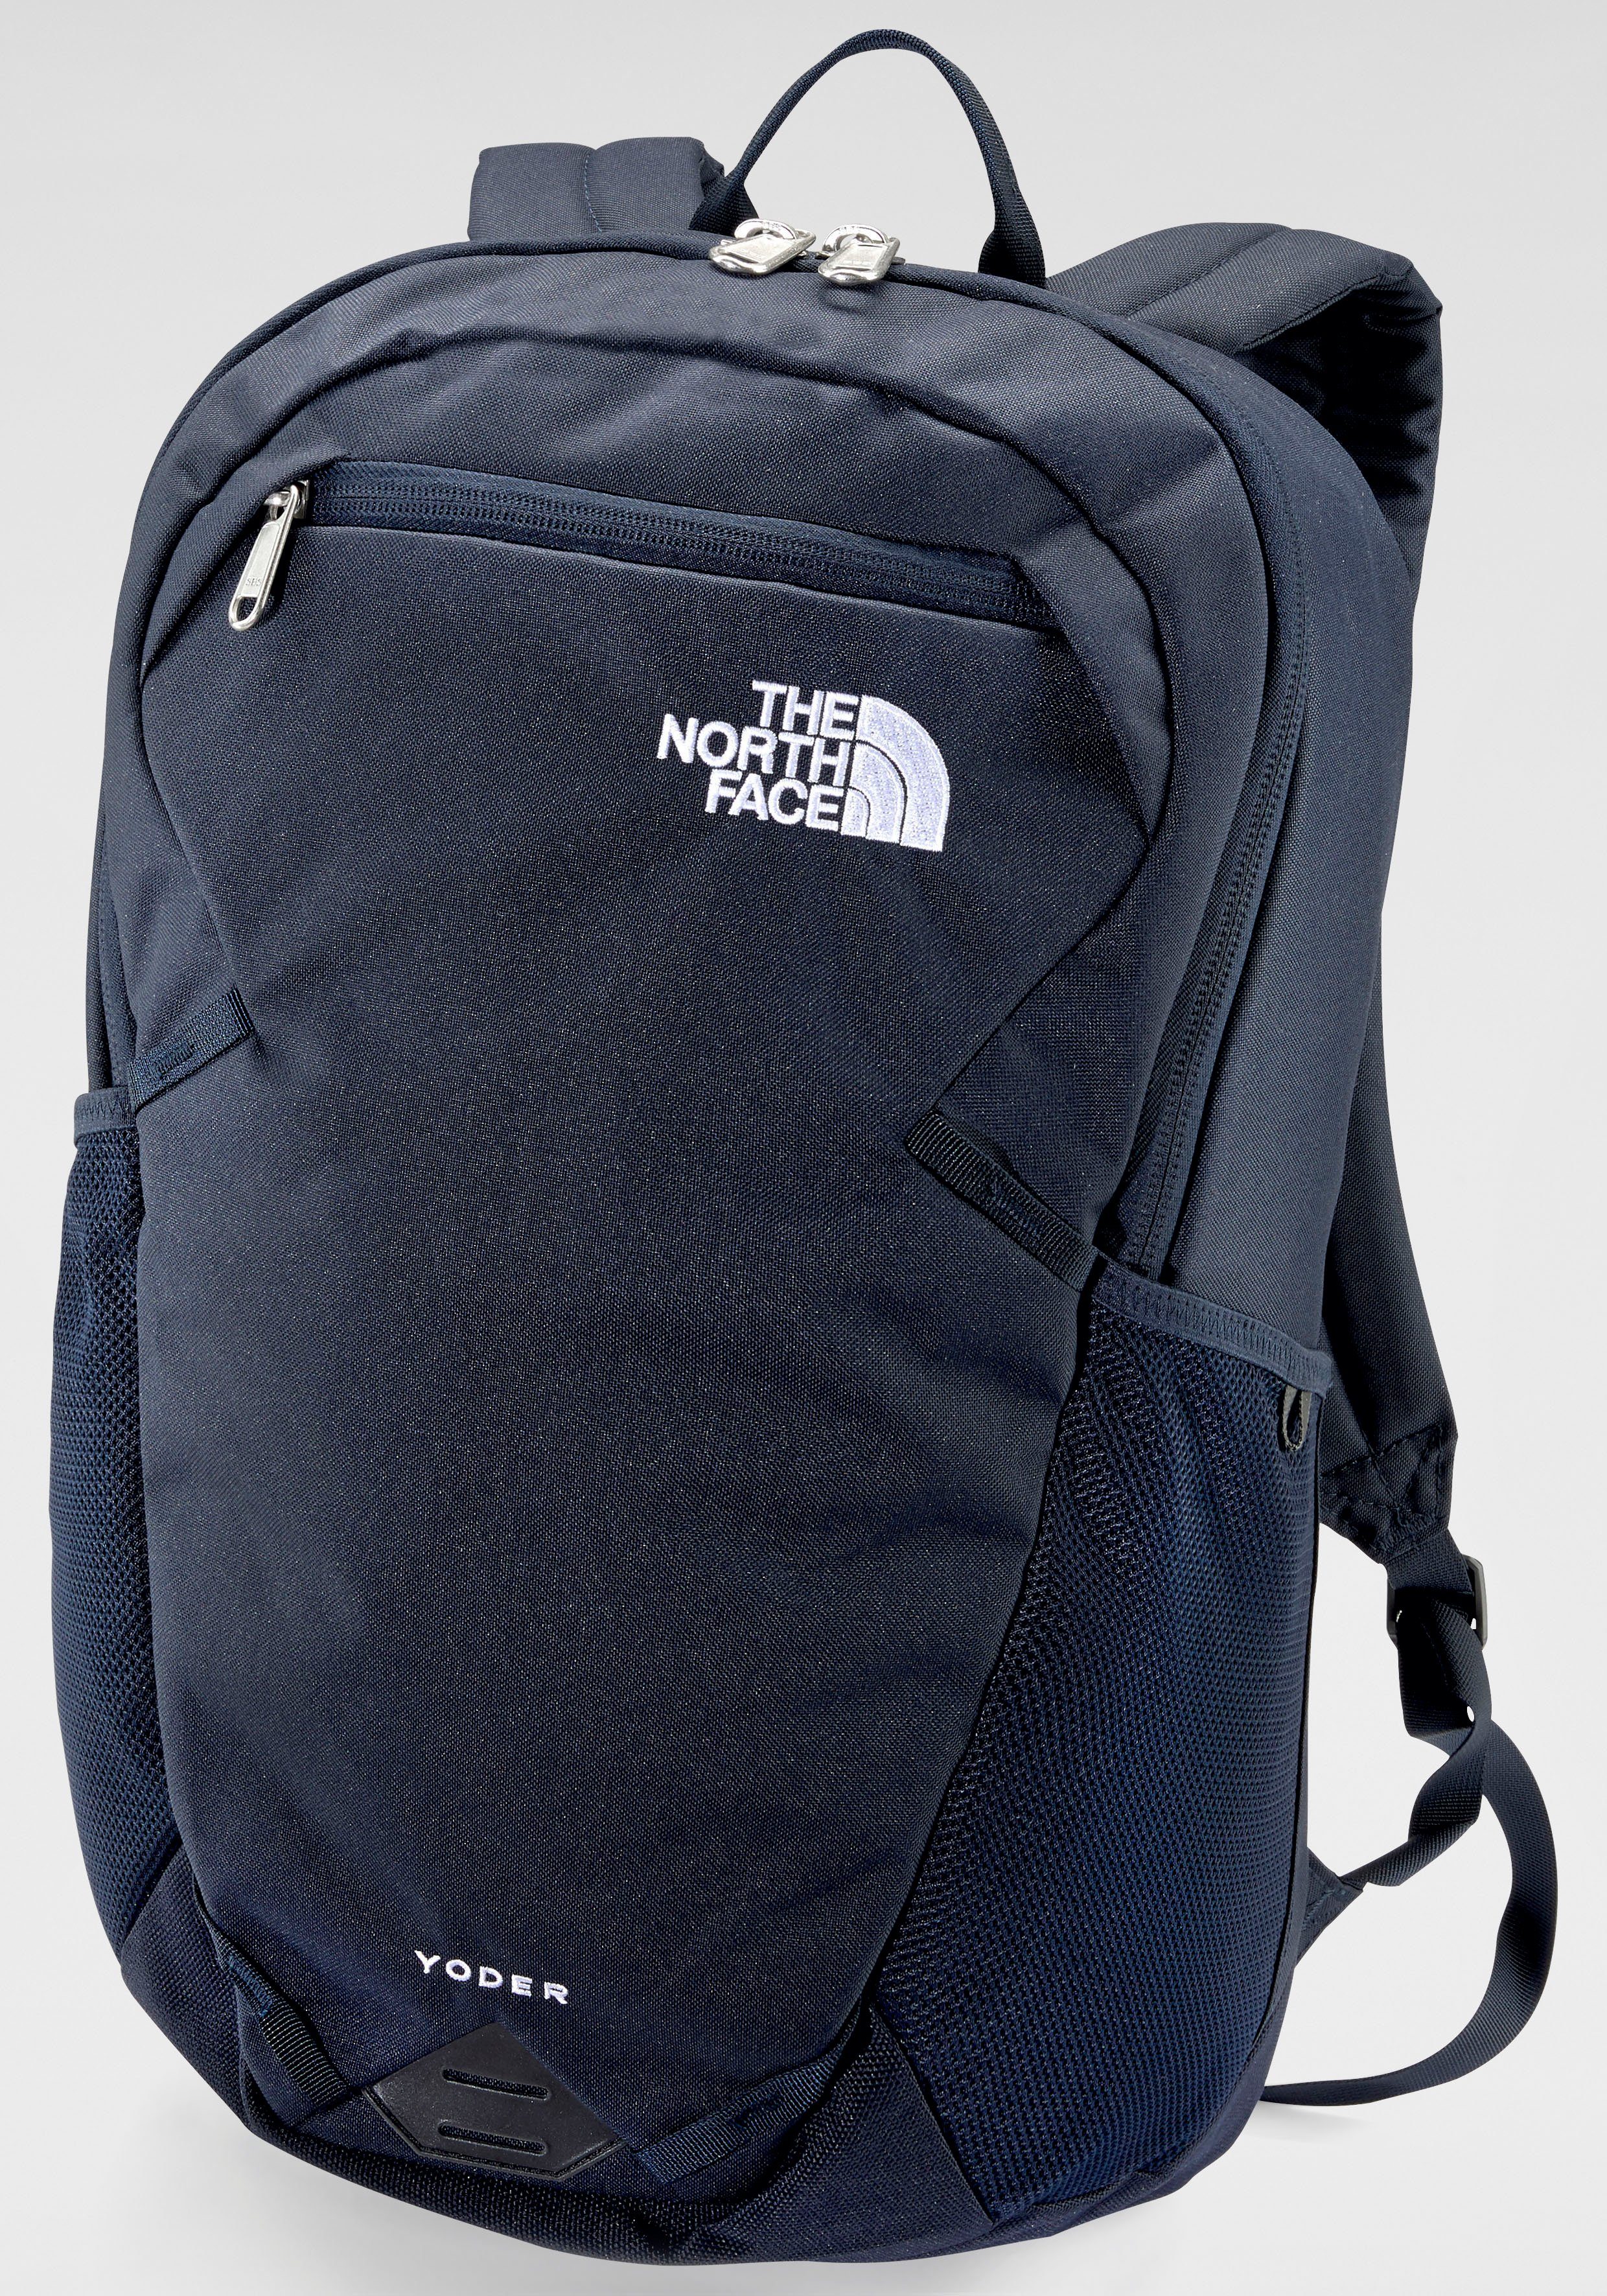 yoder the north face